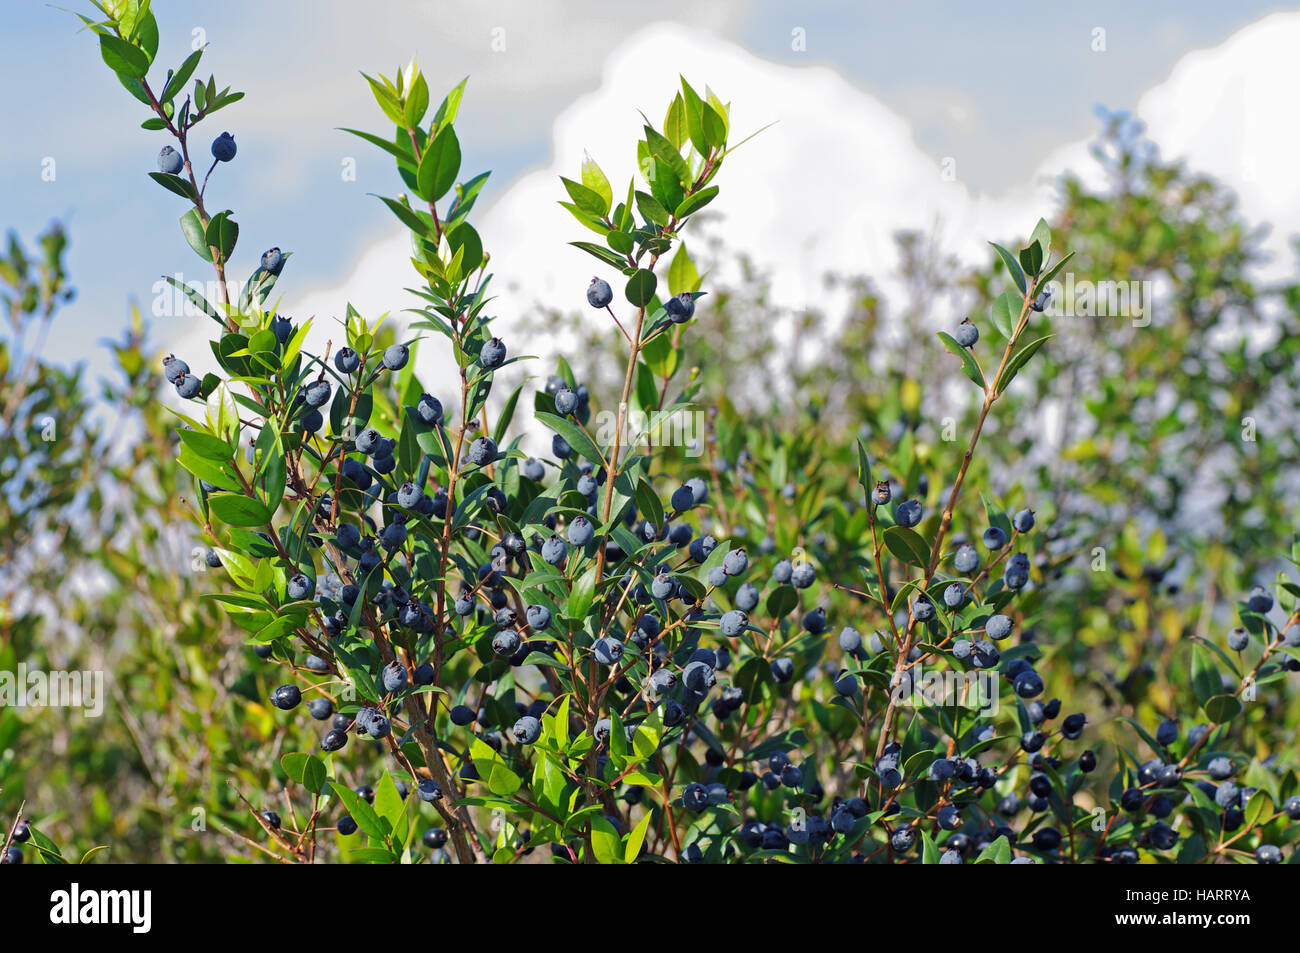 Myrtus communis, the Common myrtle, with fruits (berries), family Myrtaceae Stock Photo